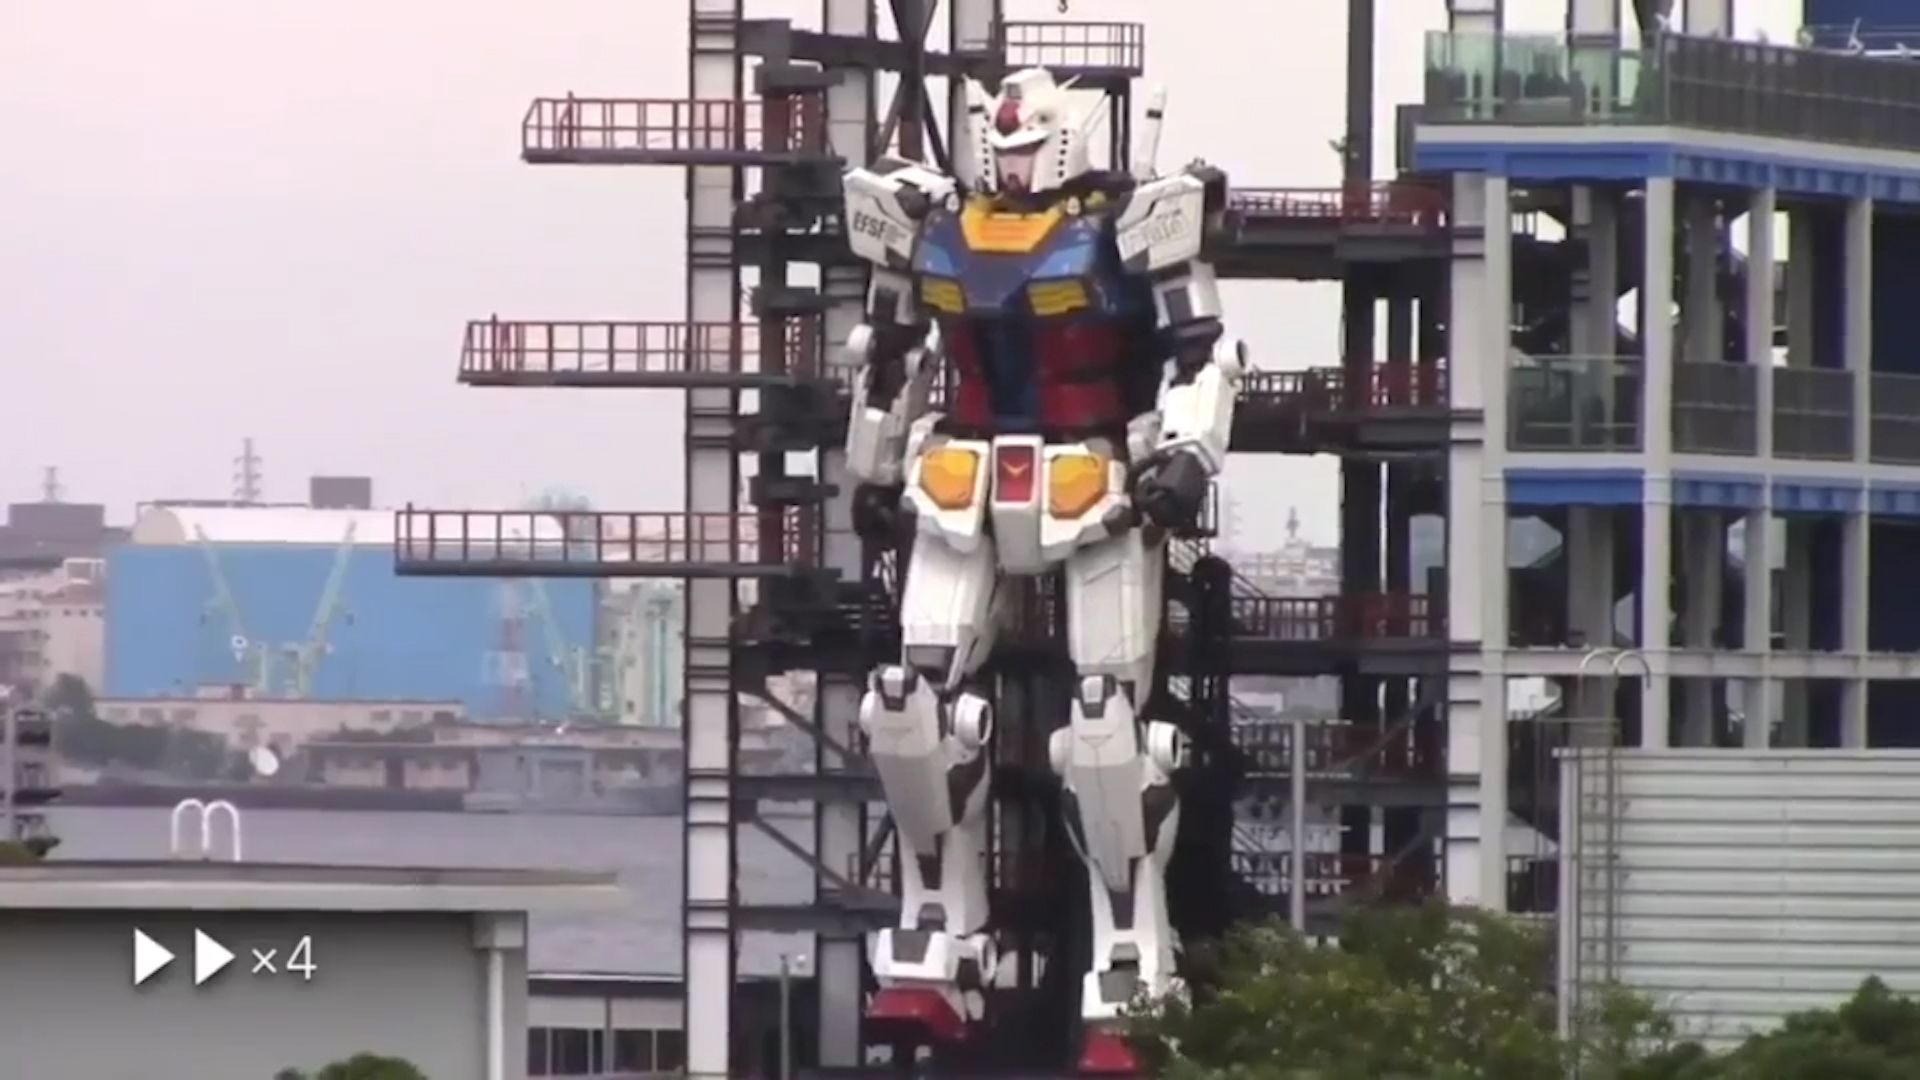 Giant Robot towers over Tokyo To celebrate the 30th anniversary of